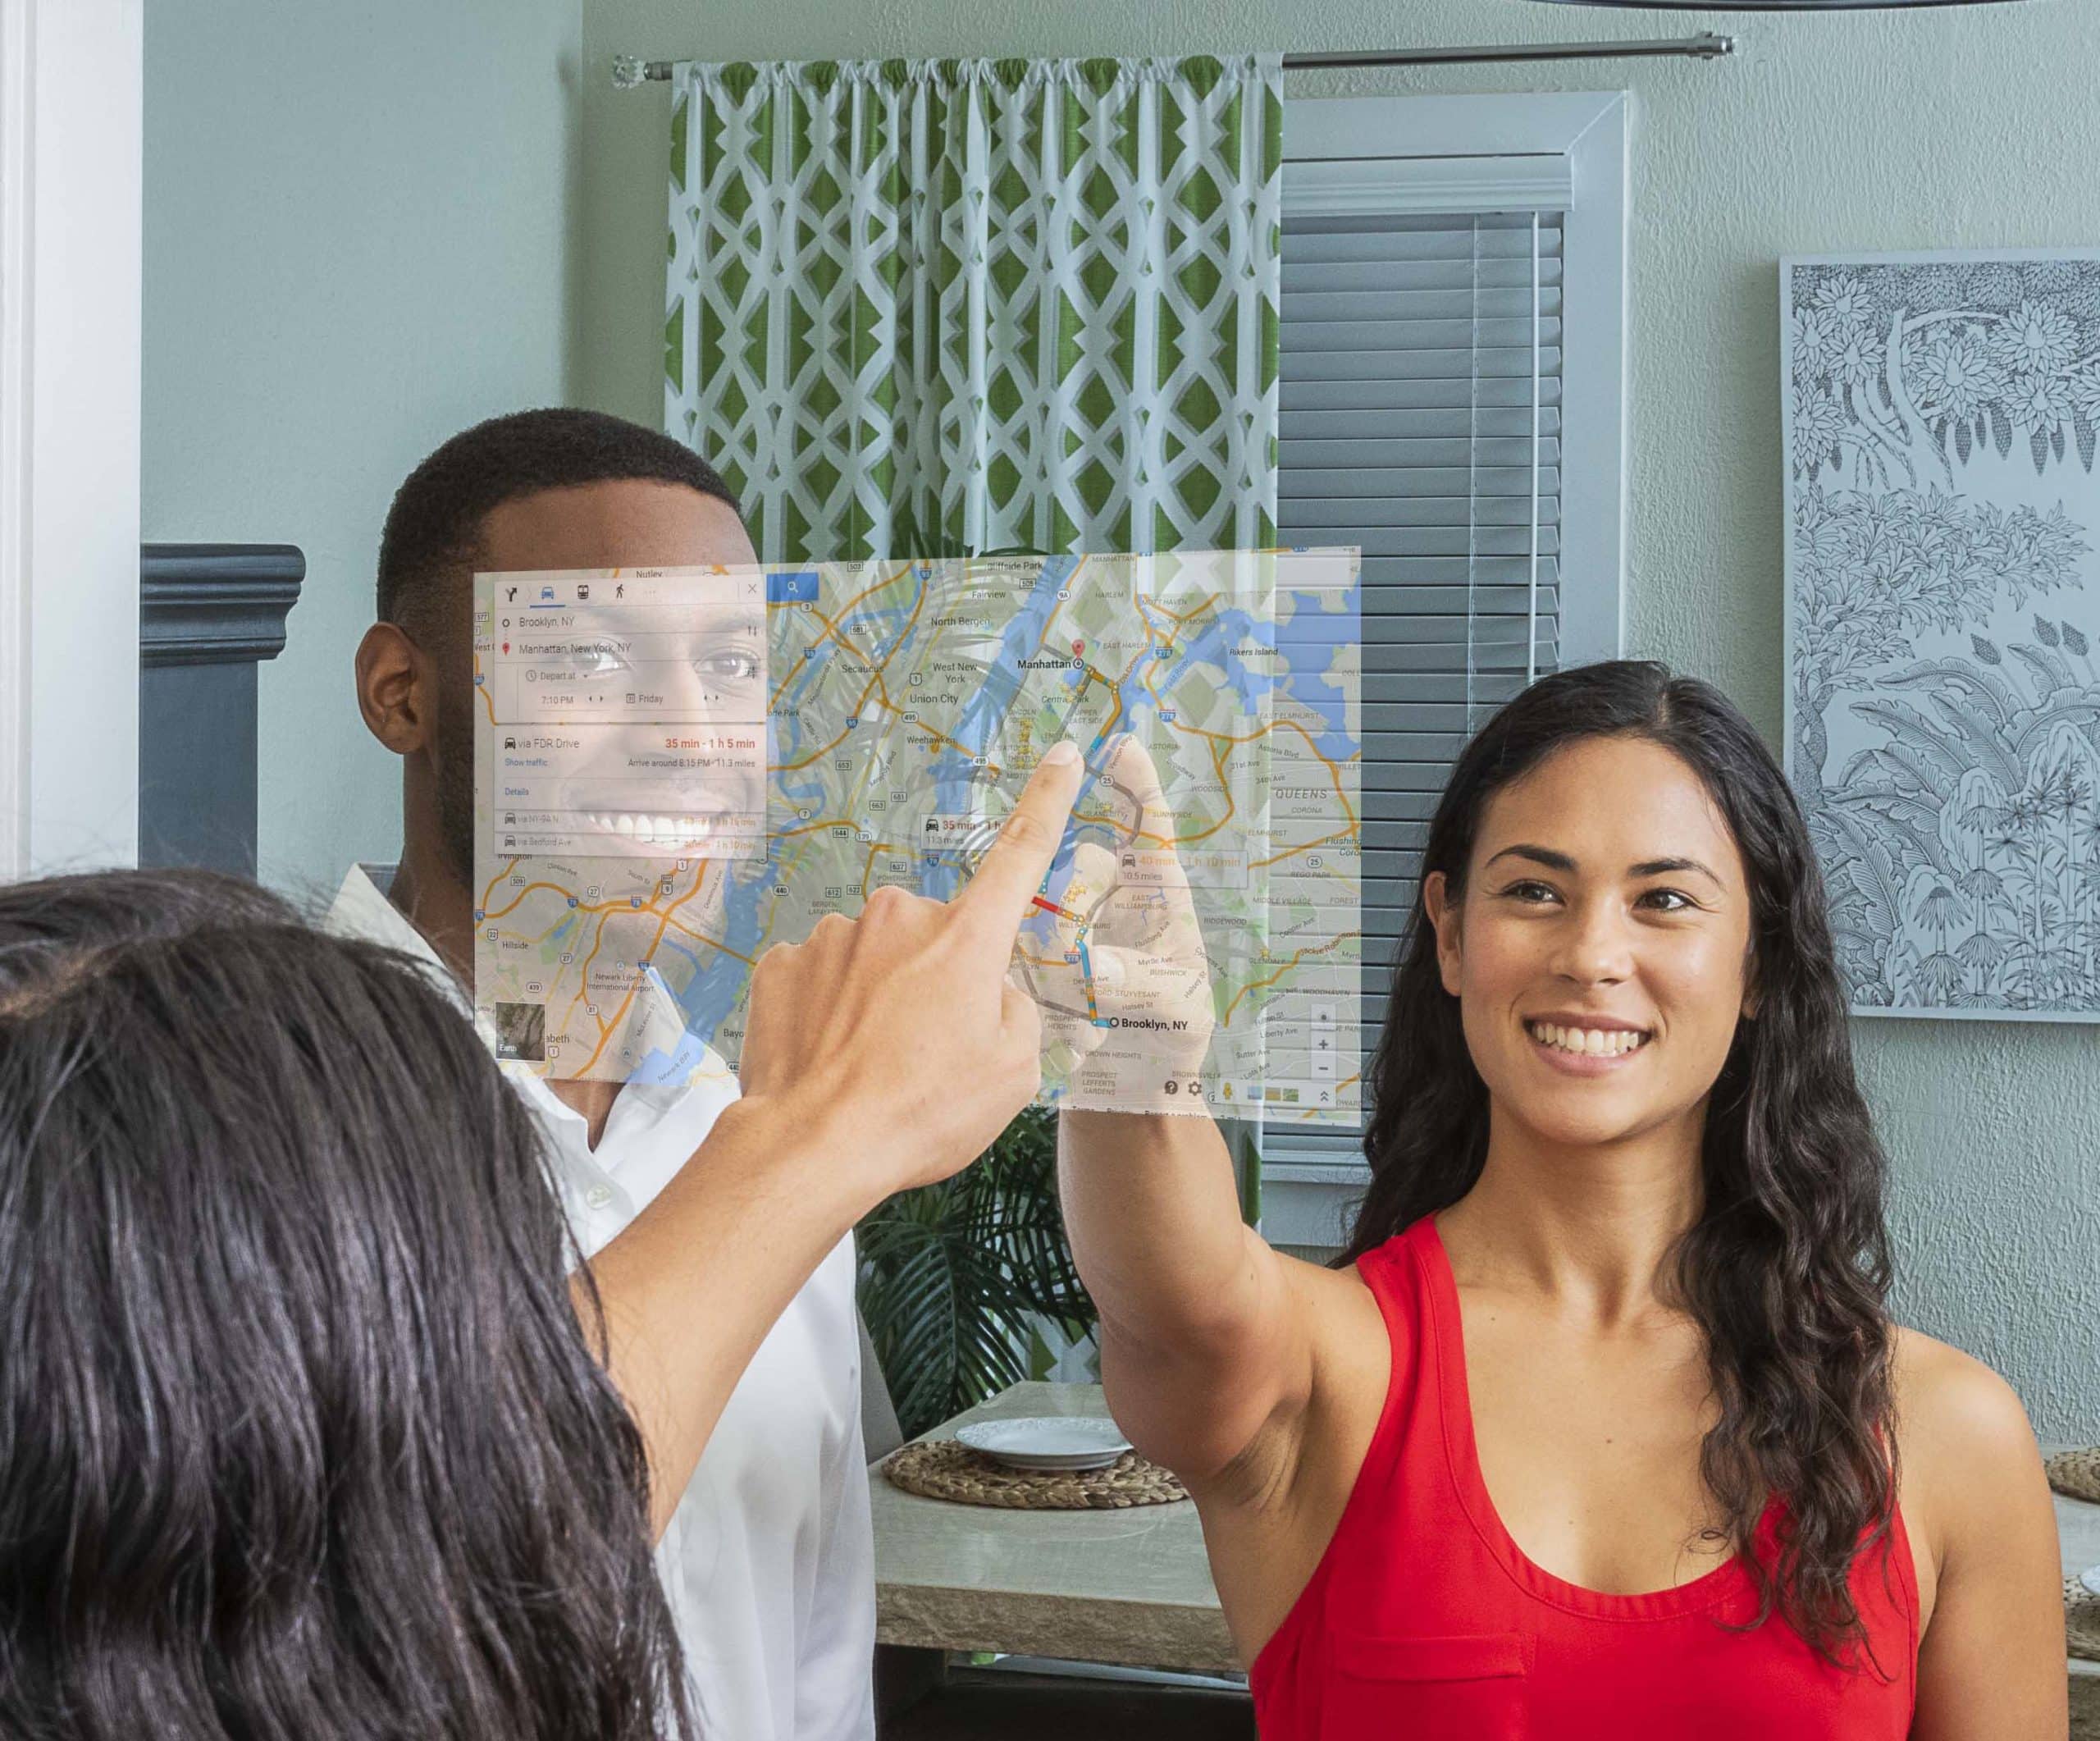 What Makes a Smart Mirror “Smart”